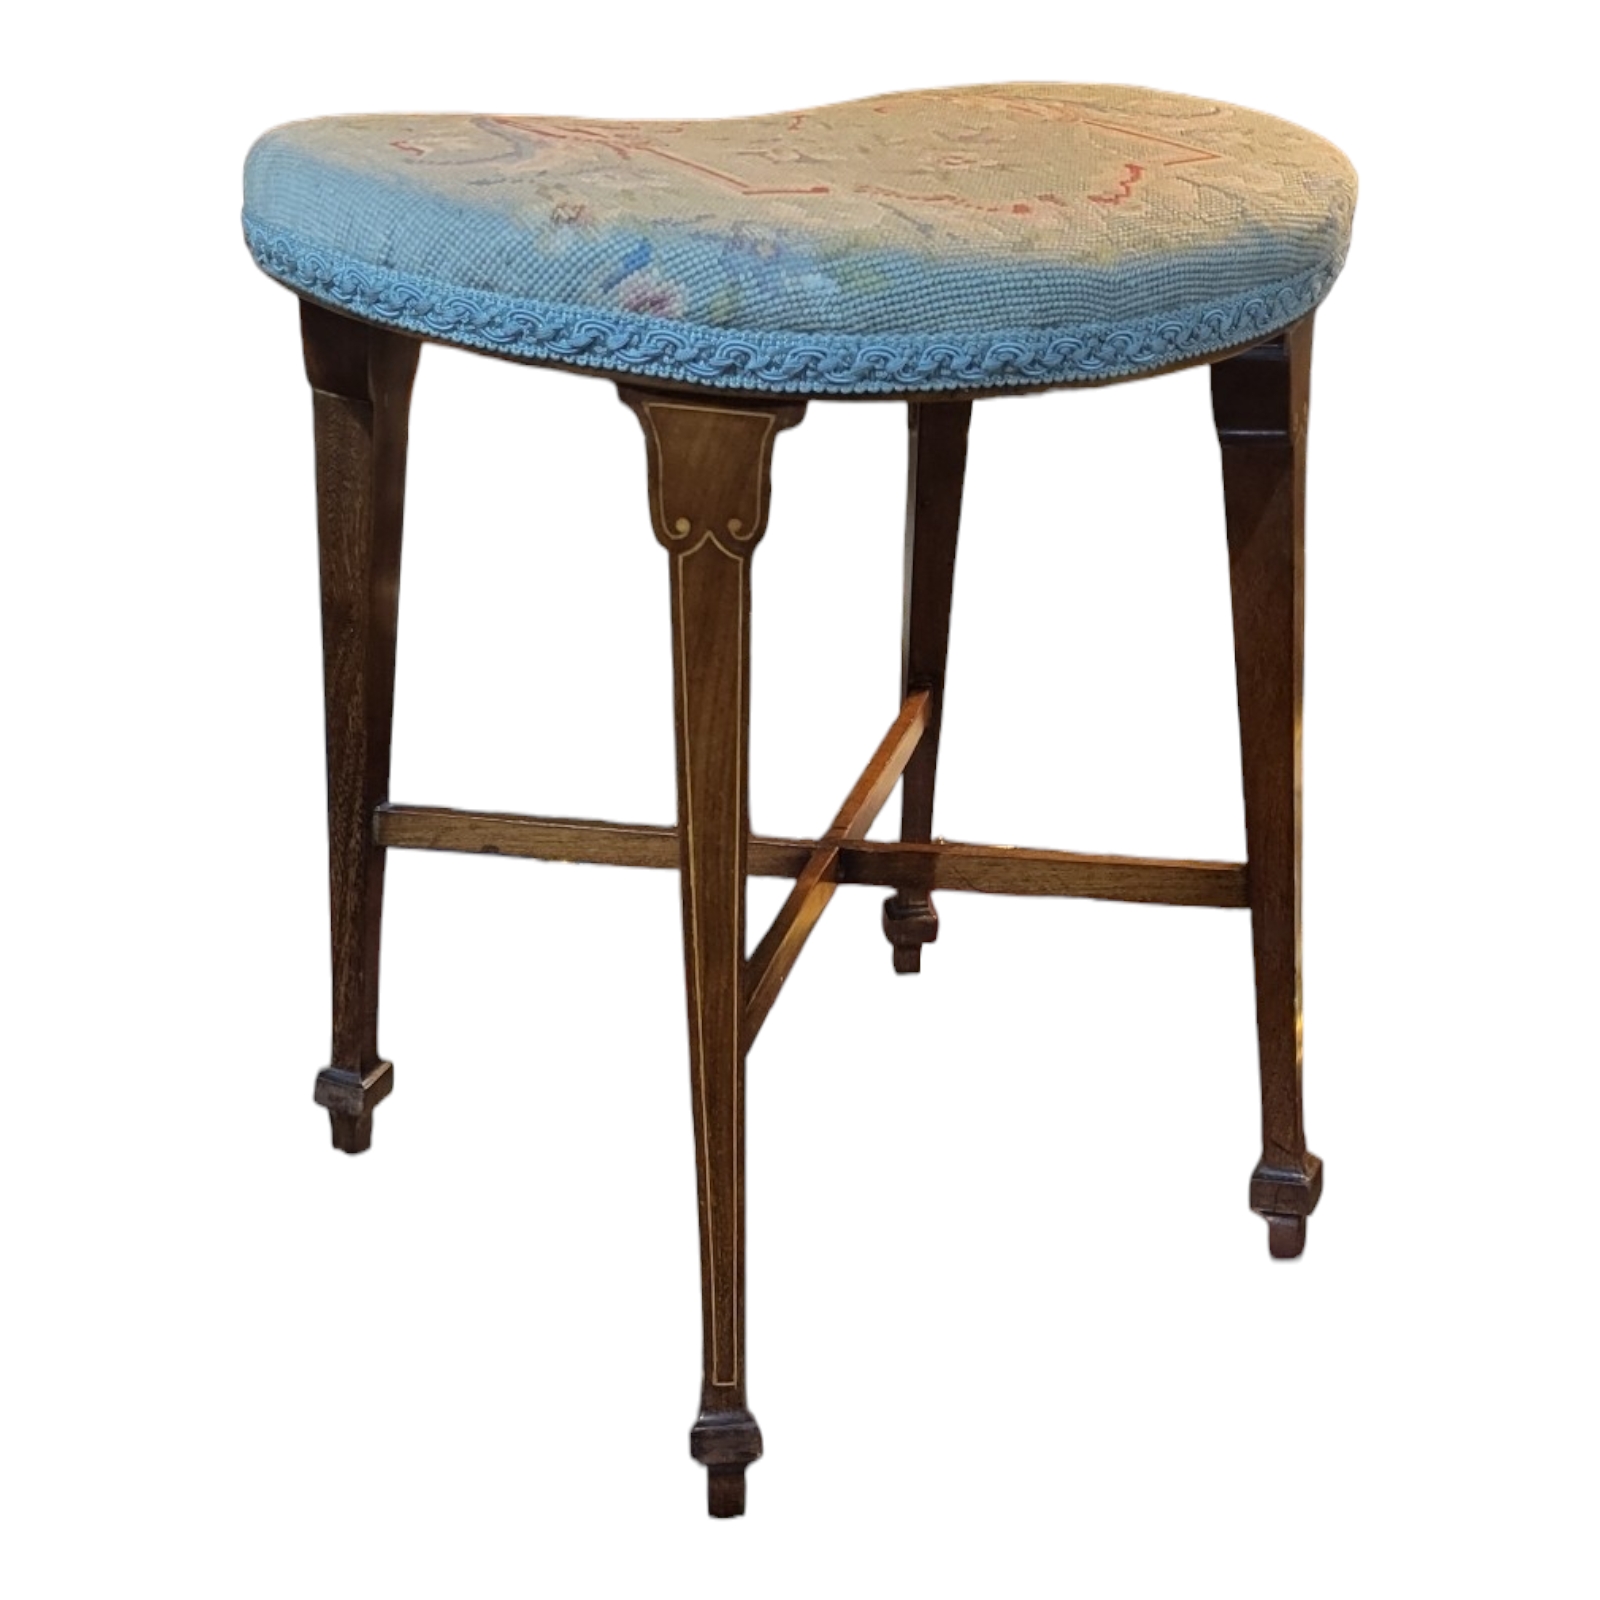 AN EDWARDIAN SHERATON REVIVAL INLAID MAHOGANY STOOL Raised on tapering legs and x shaped supports,